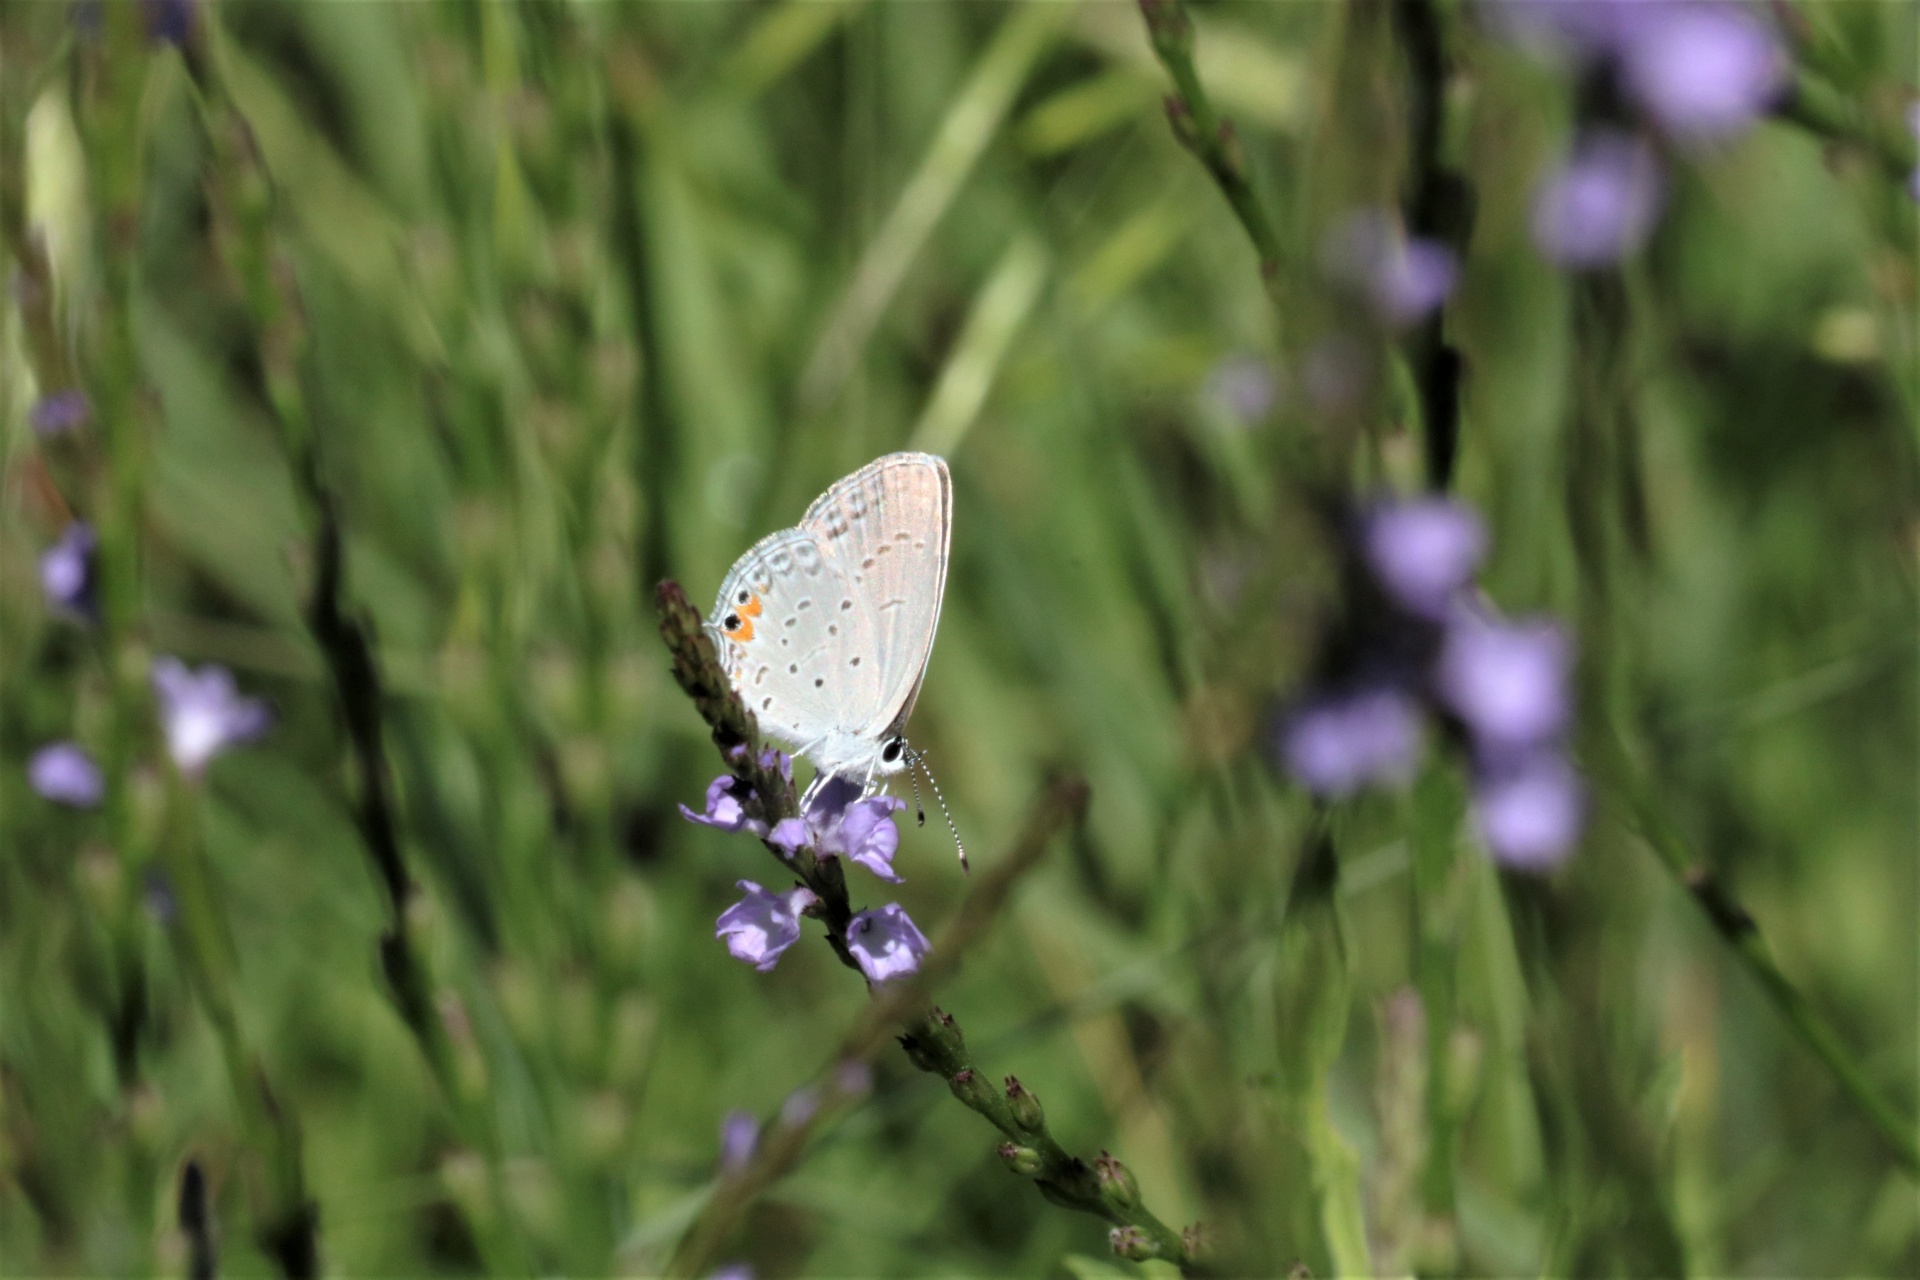 Ventral view of a gray hairstreak butterfly with tiny blue wildflowers on a blurred green background.